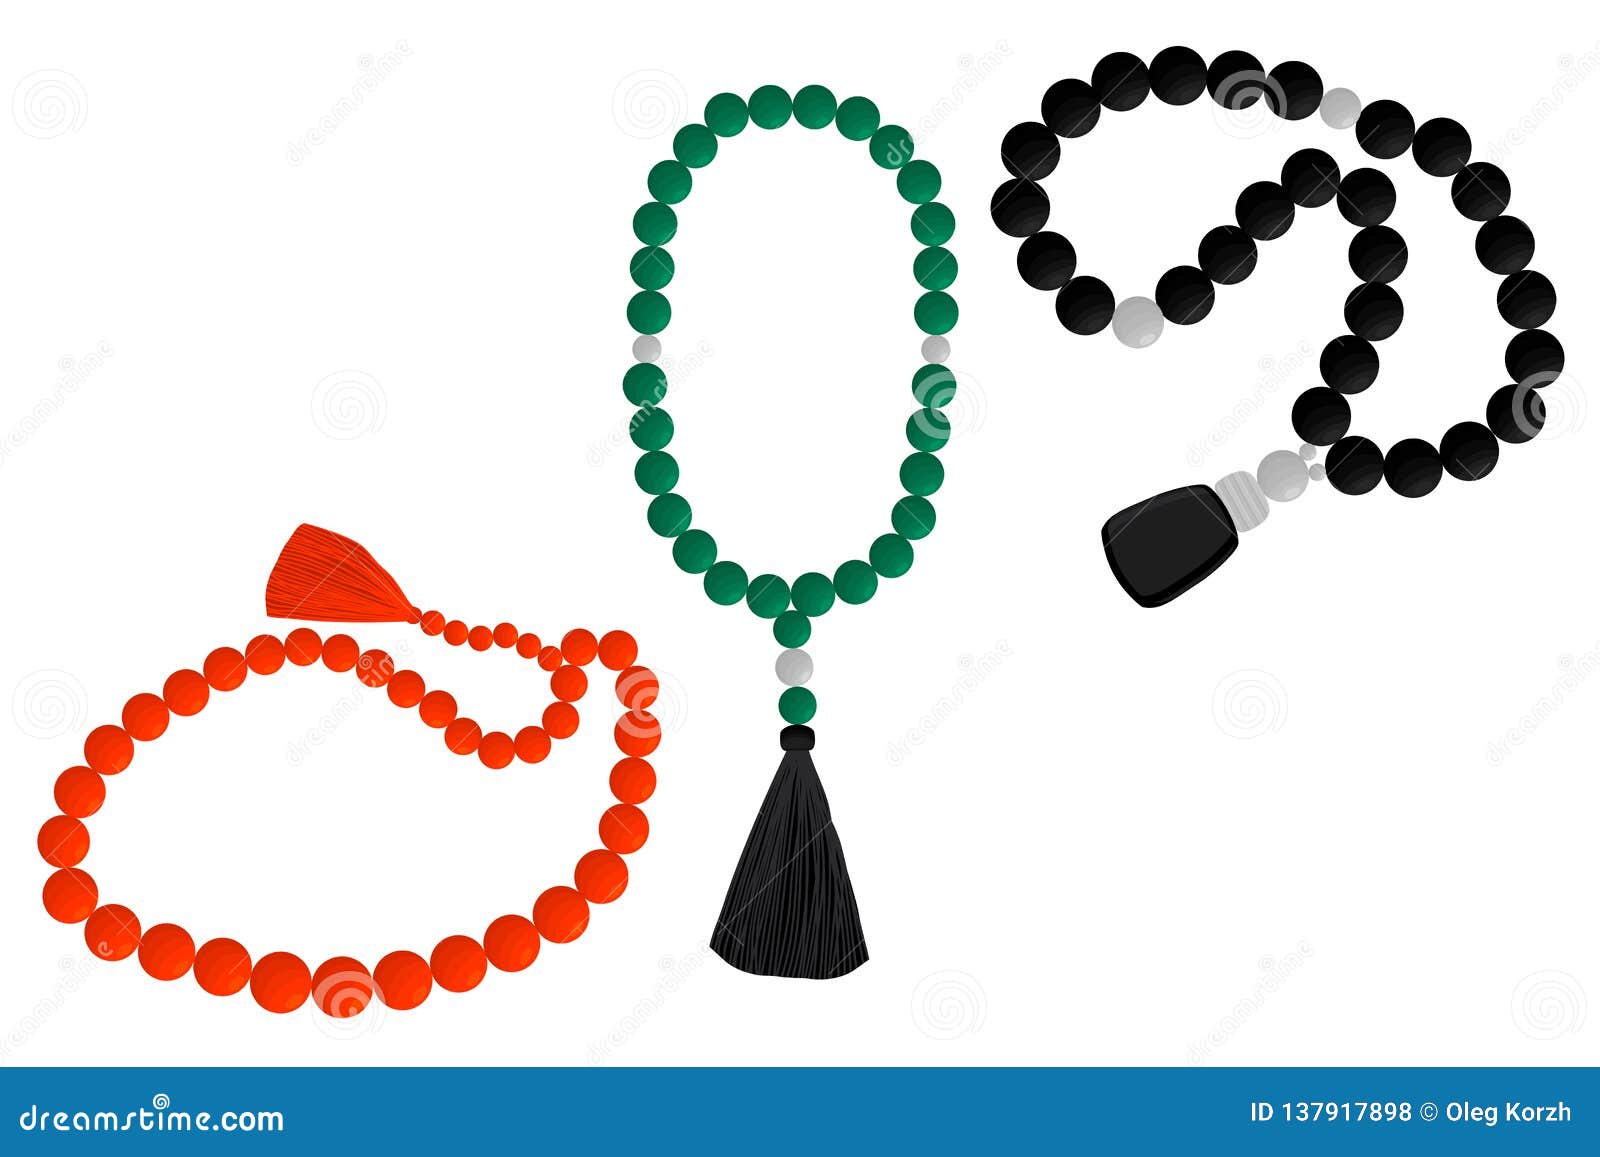 Set Different Types Of Beads For Rosary With Tassel Stock Vector Illustration Of Cartoon Middle 137917898